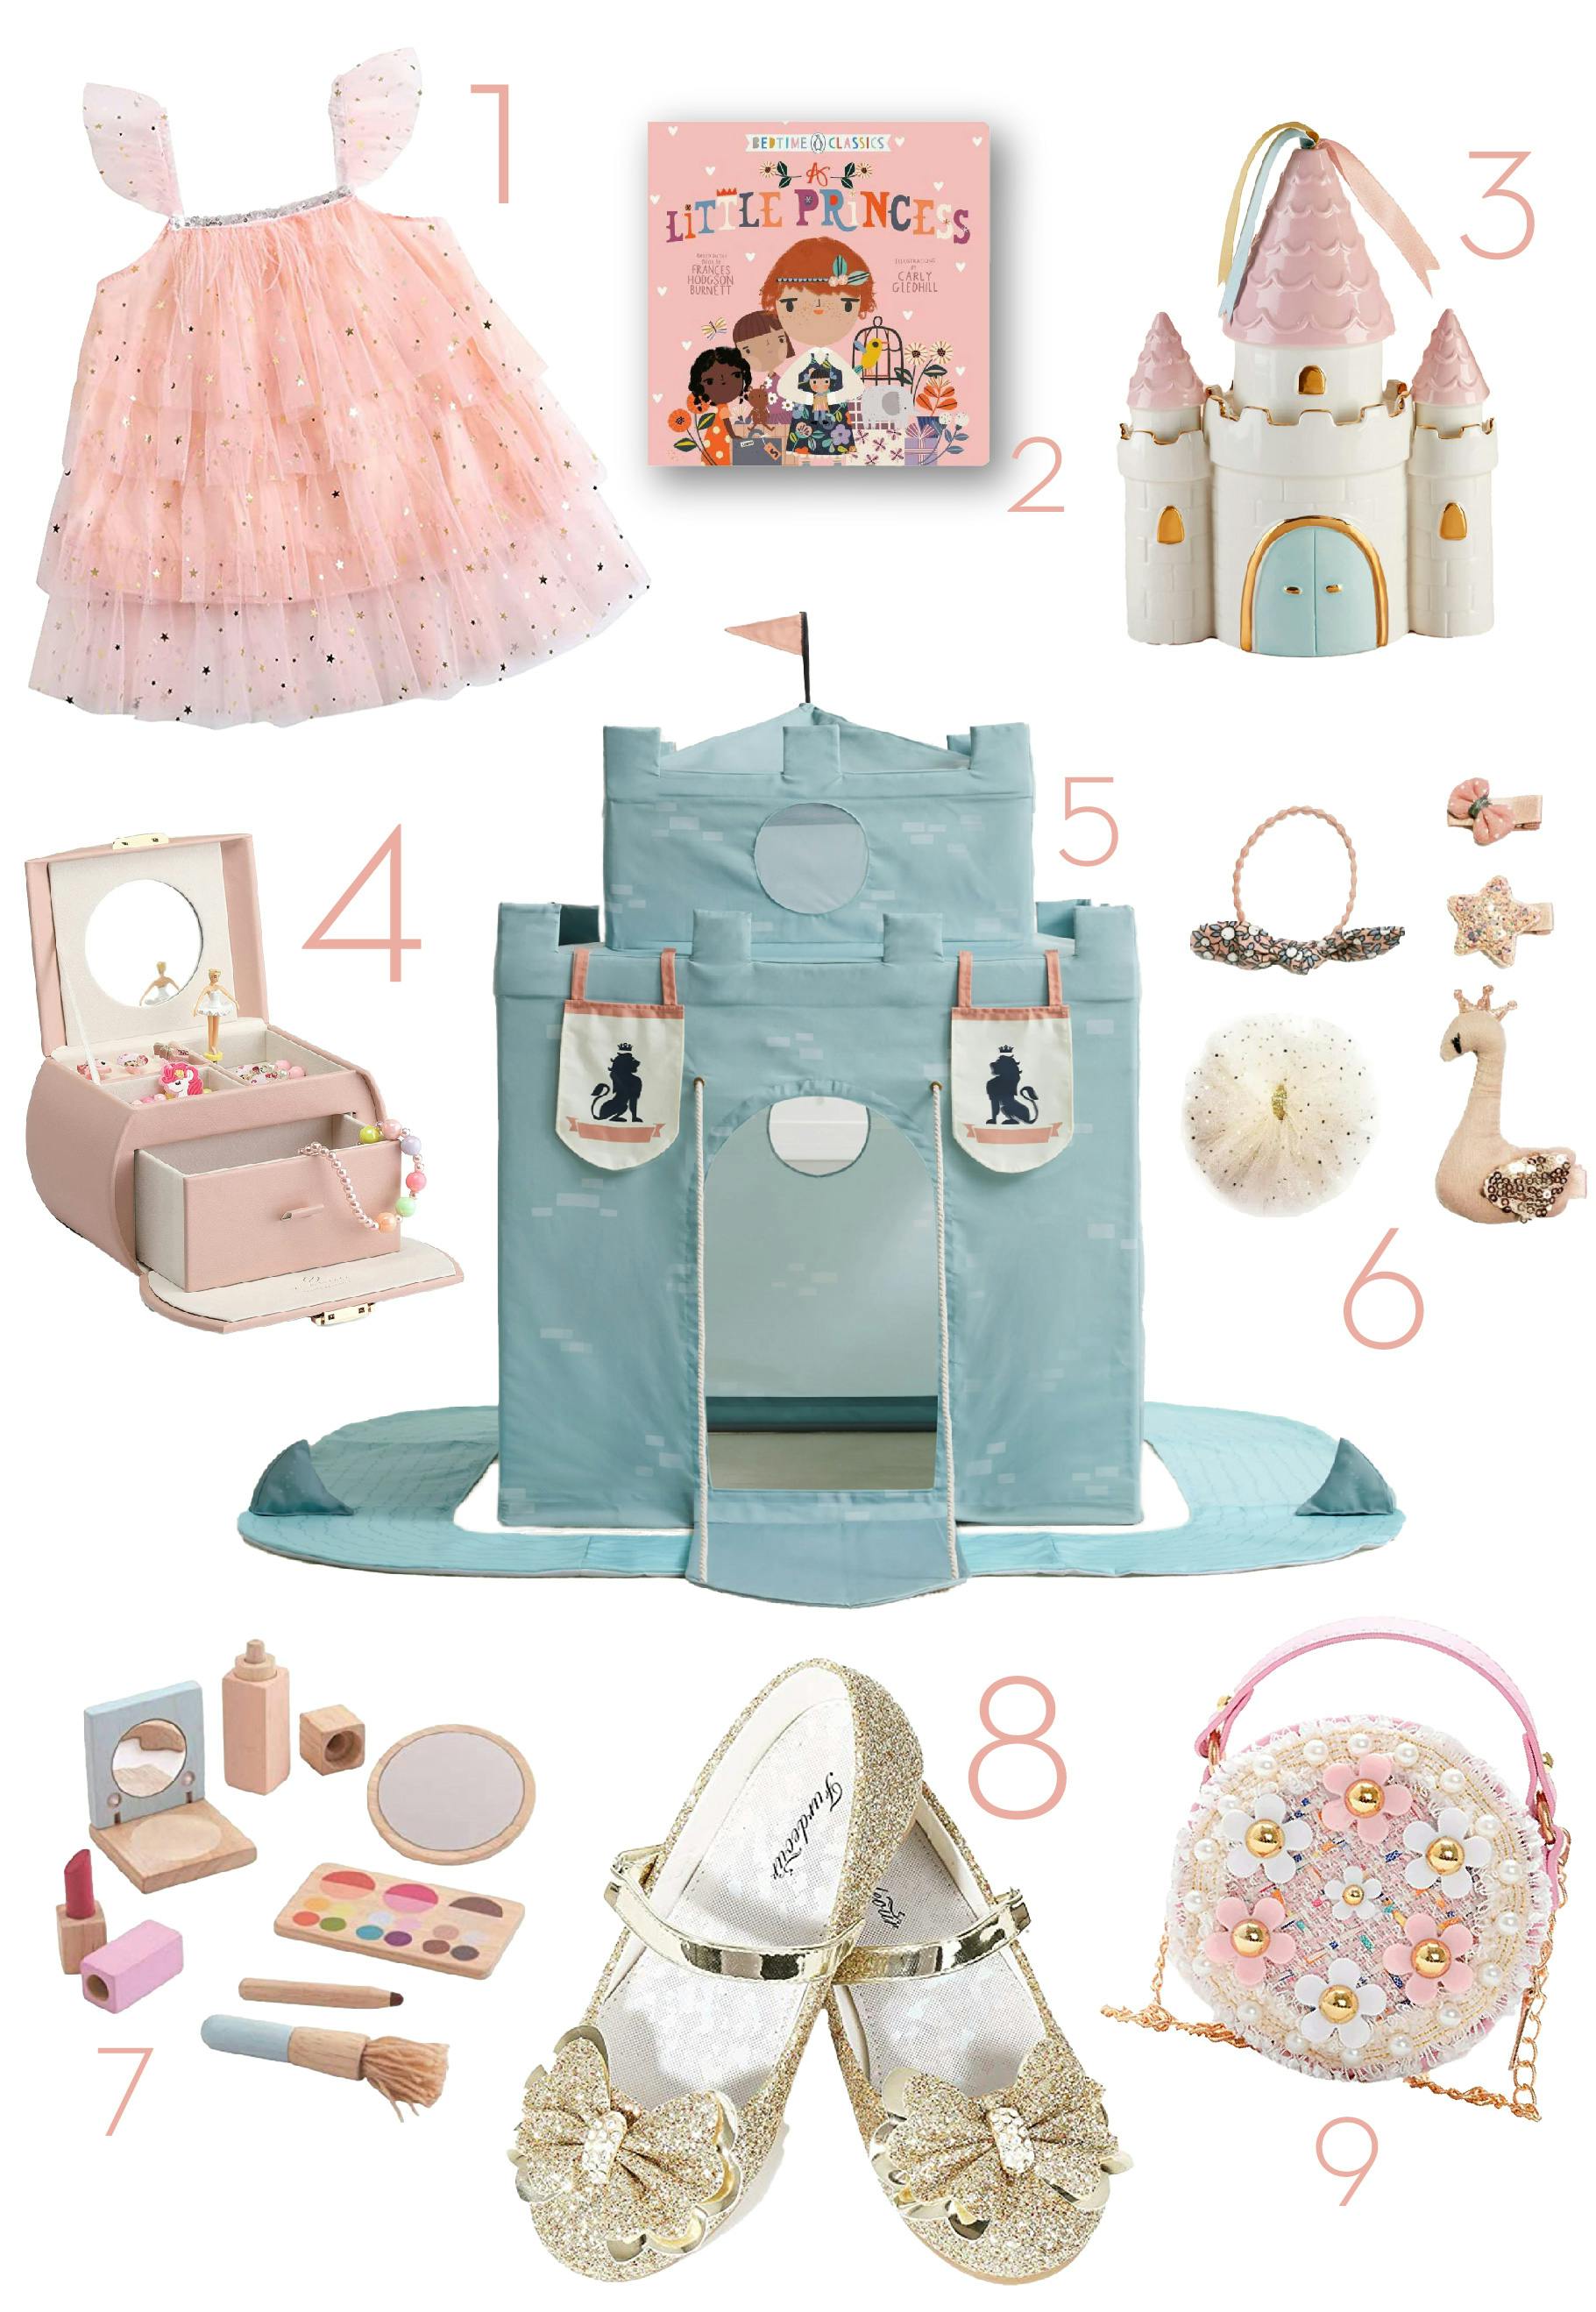 The Best Gifts for your little Princess